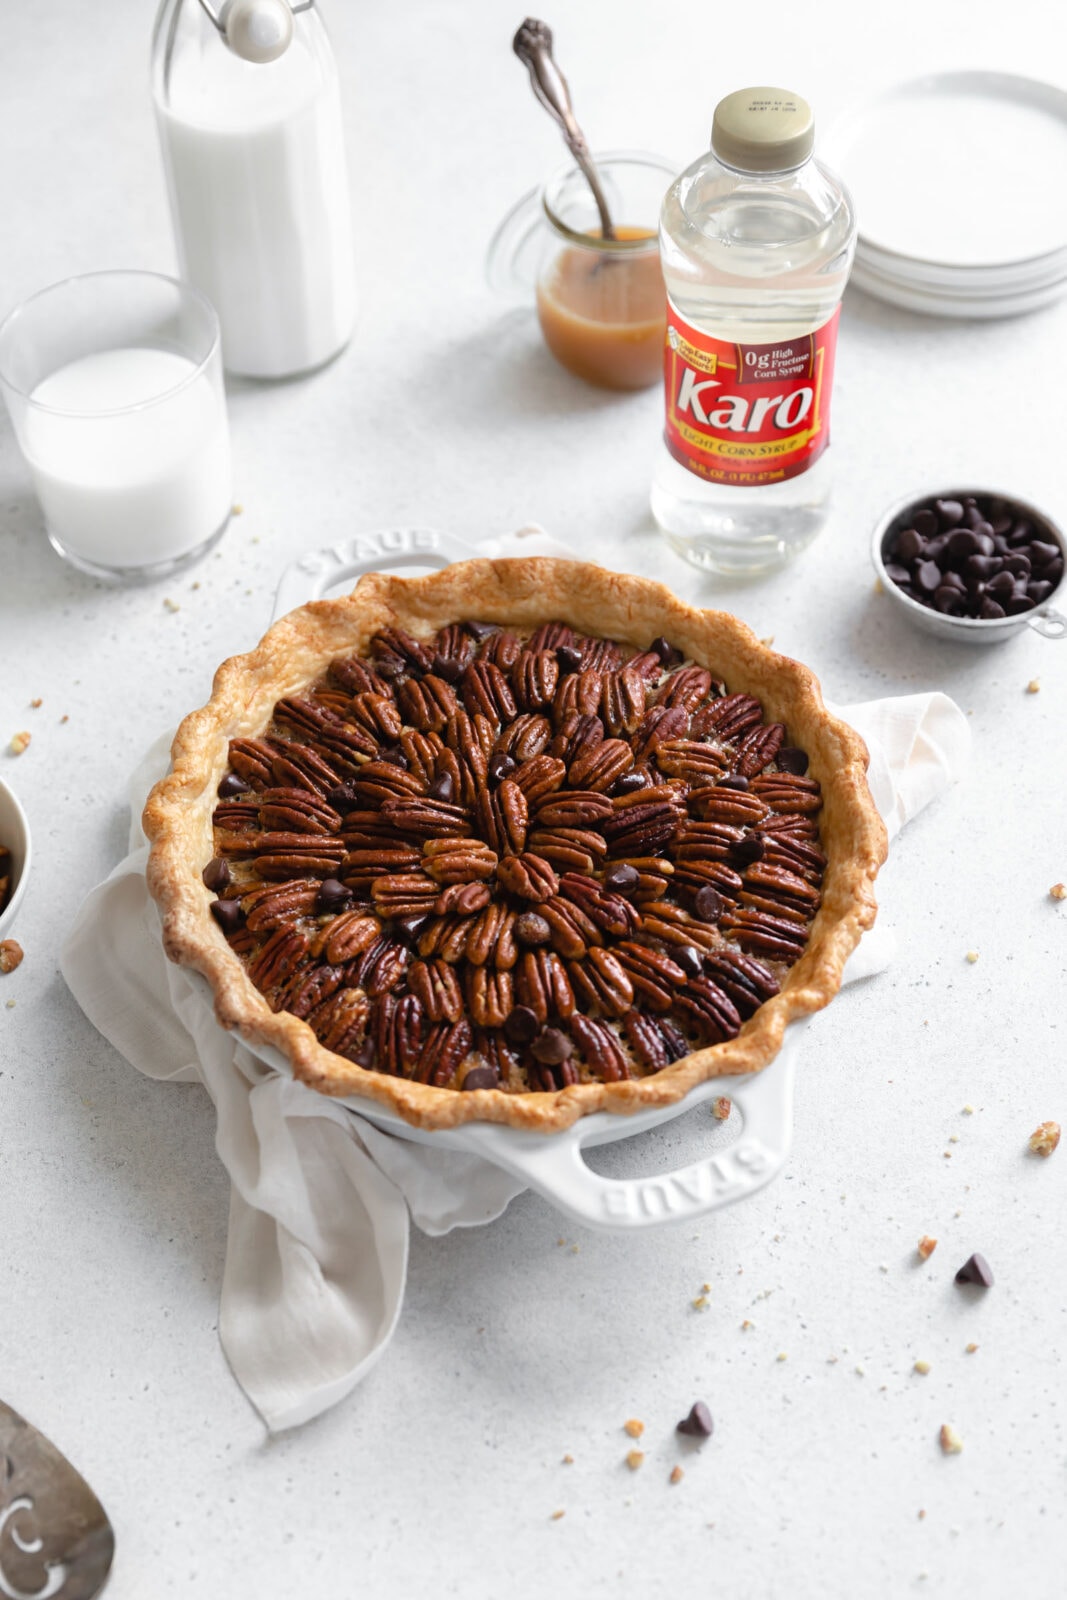 turtle pecan pie with chocolate